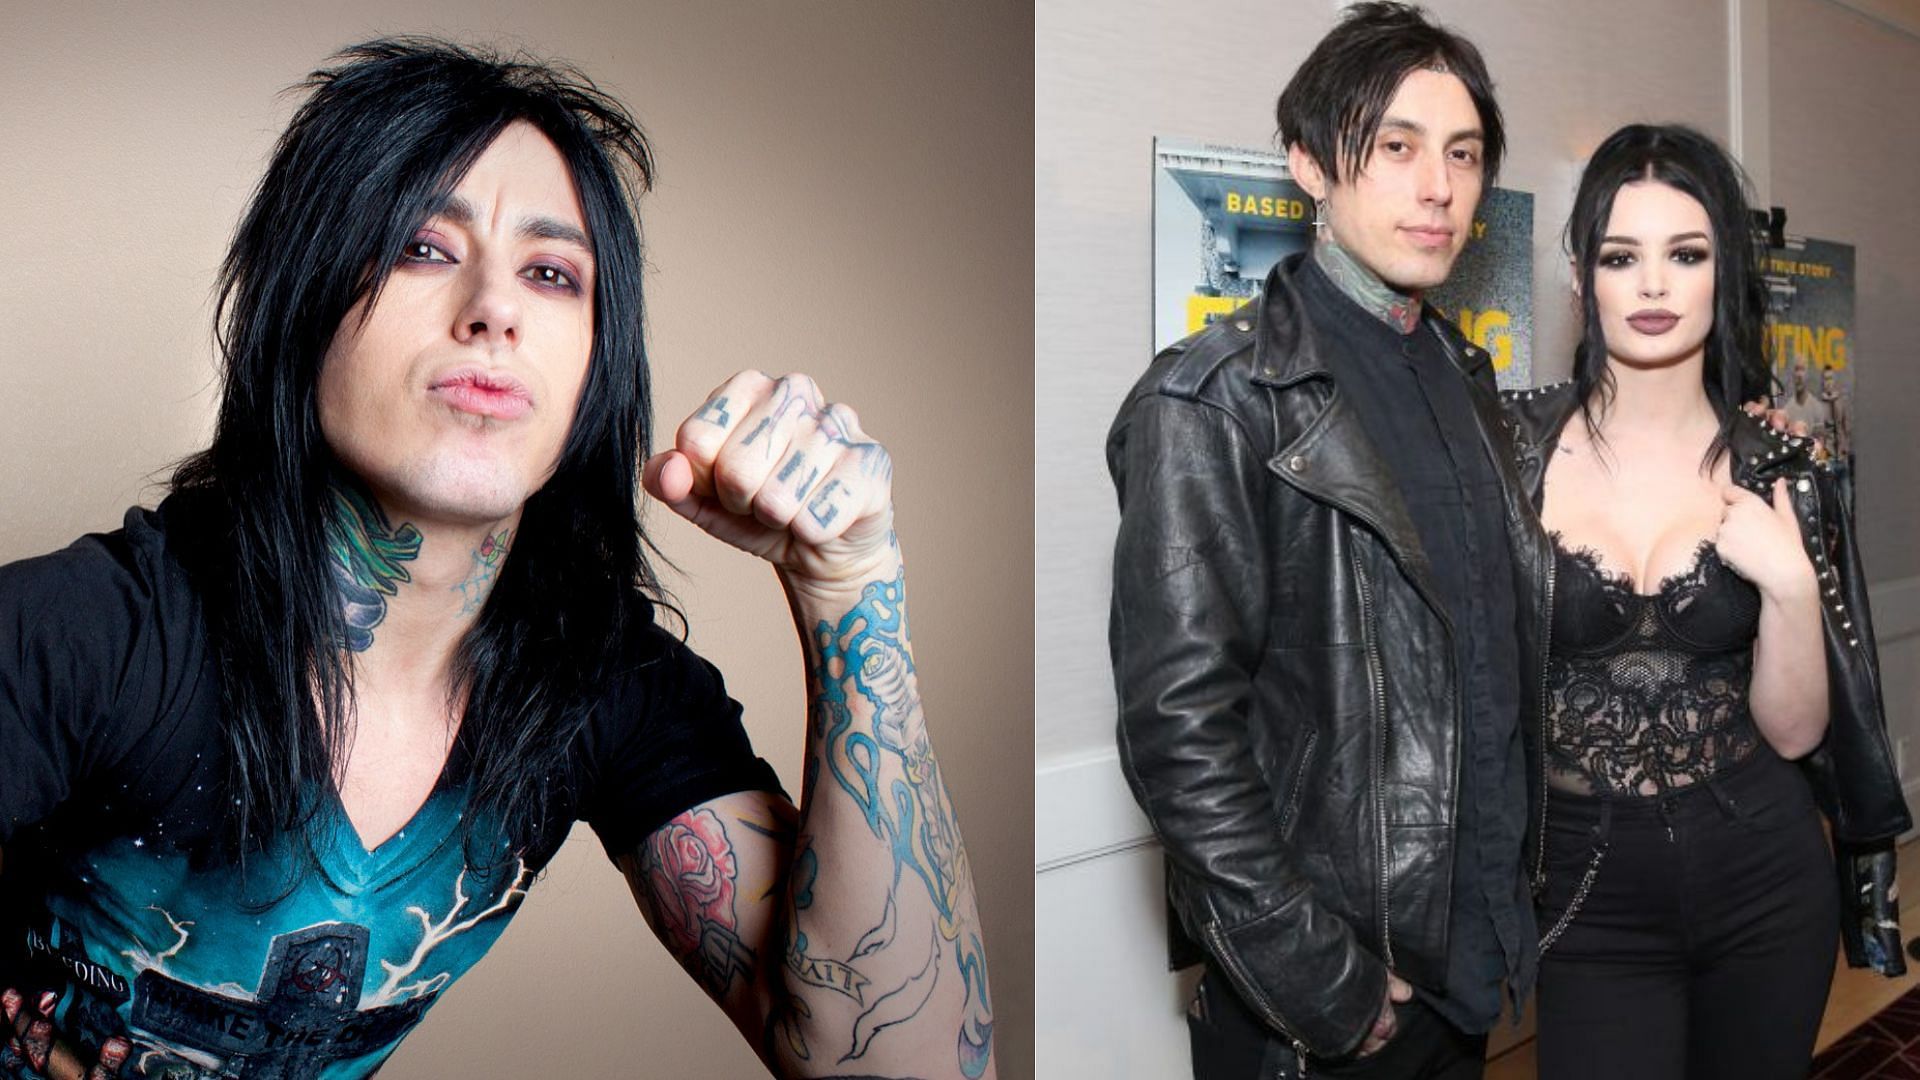 Ronnie Radke and Saraya have been dating for five years